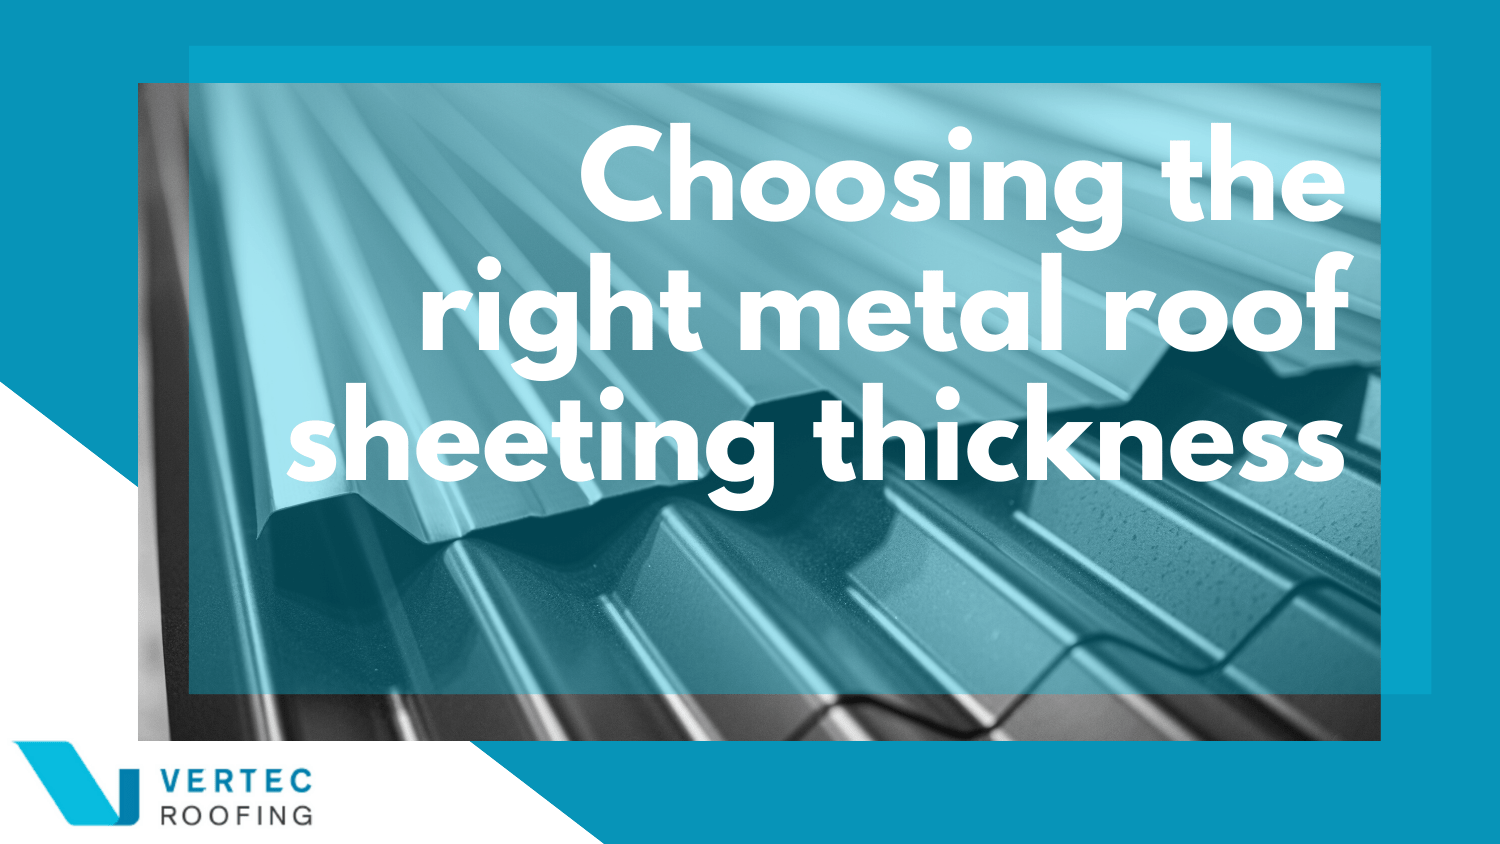 Choosing The Right Metal Roof Sheeting Thickness – 6 Expert Tips